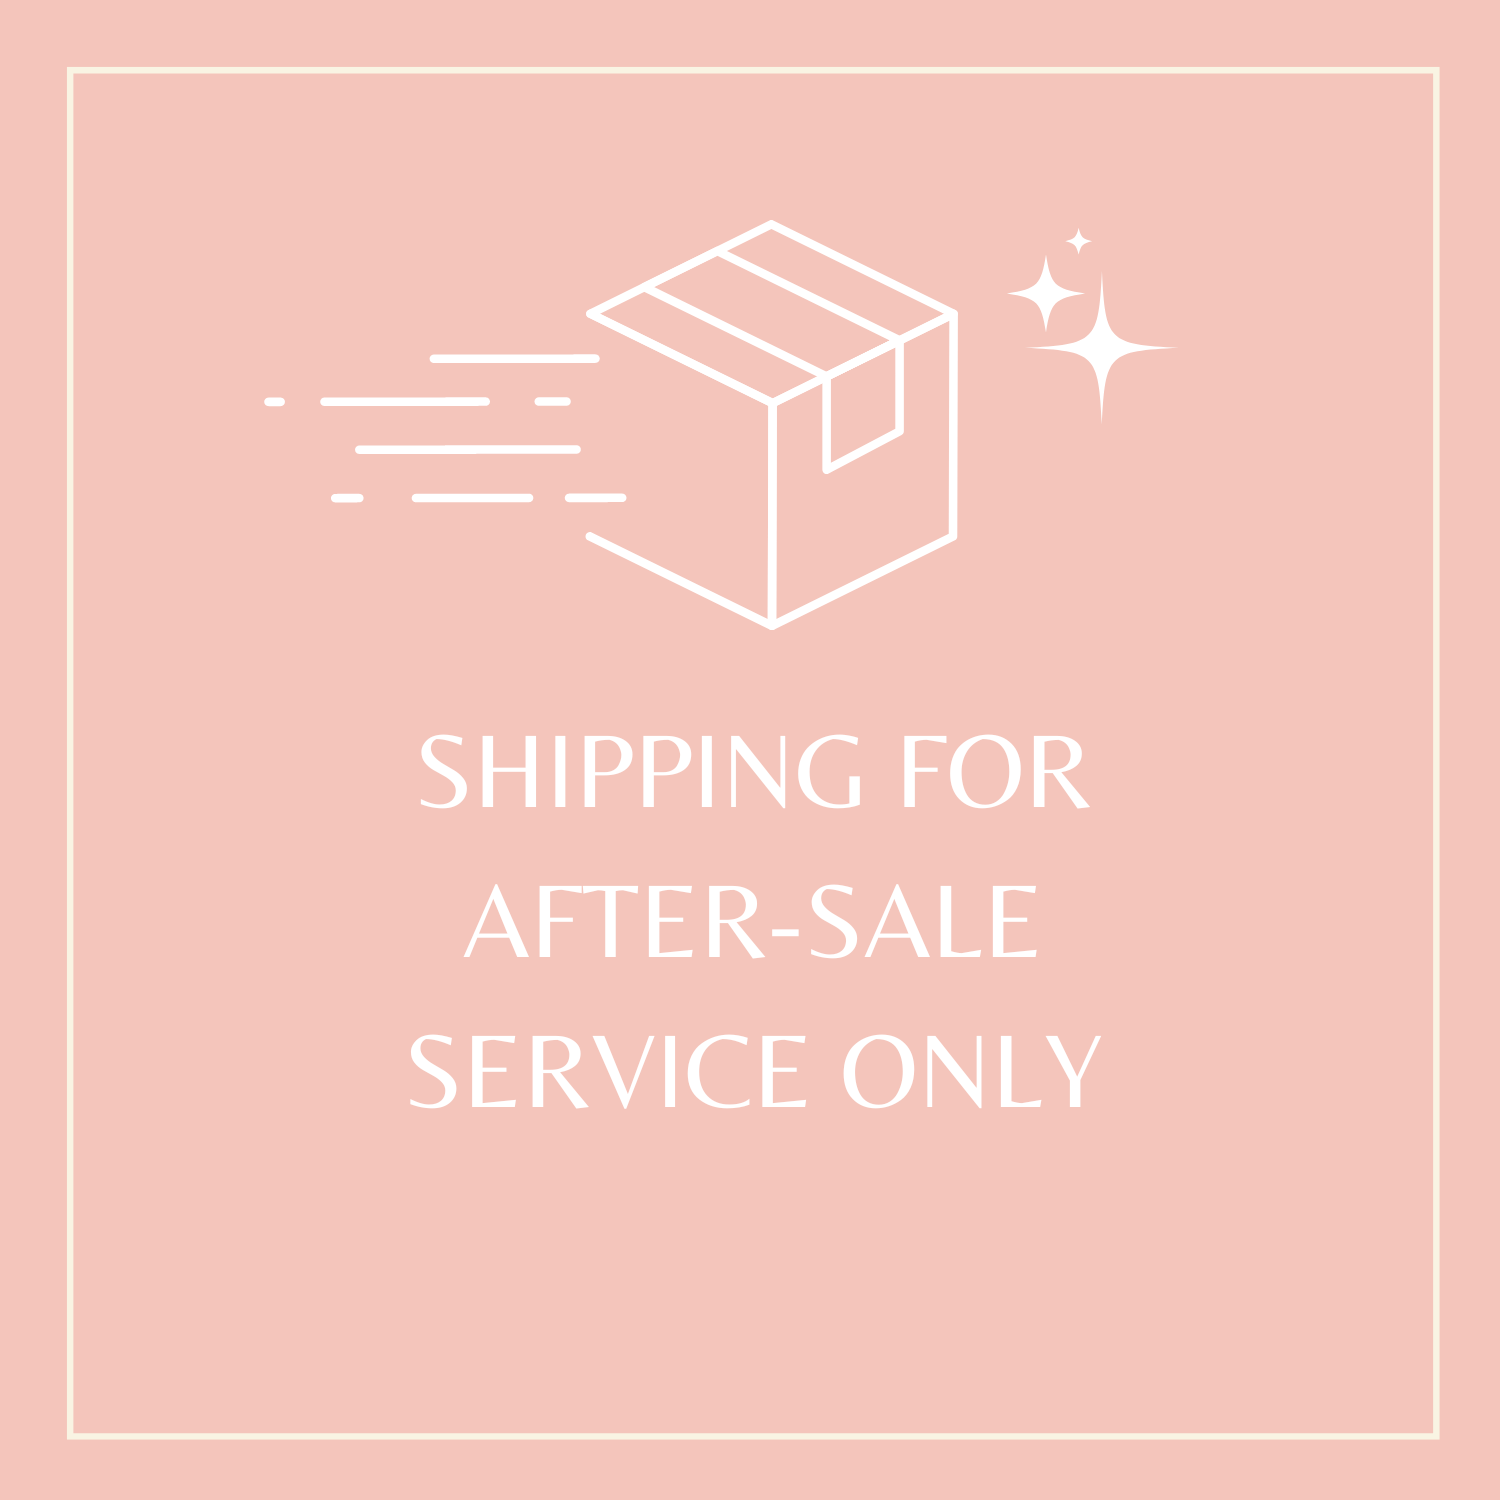 SHIPPING FOR AFTER-SALE SERVICE ONLY 1